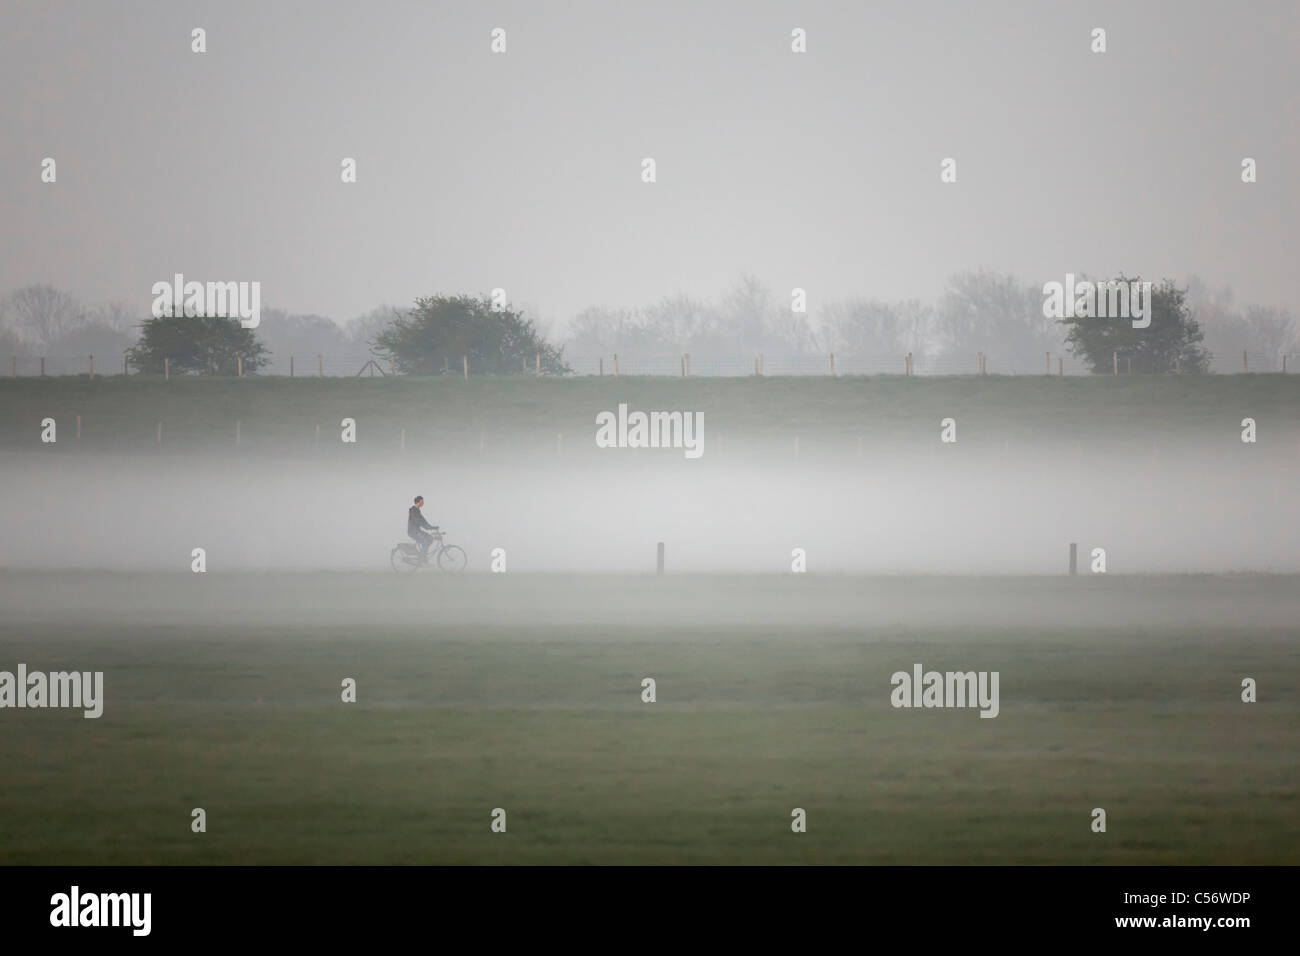 The Netherlands, Niedorp, Man on bicycle in morning mist. Stock Photo